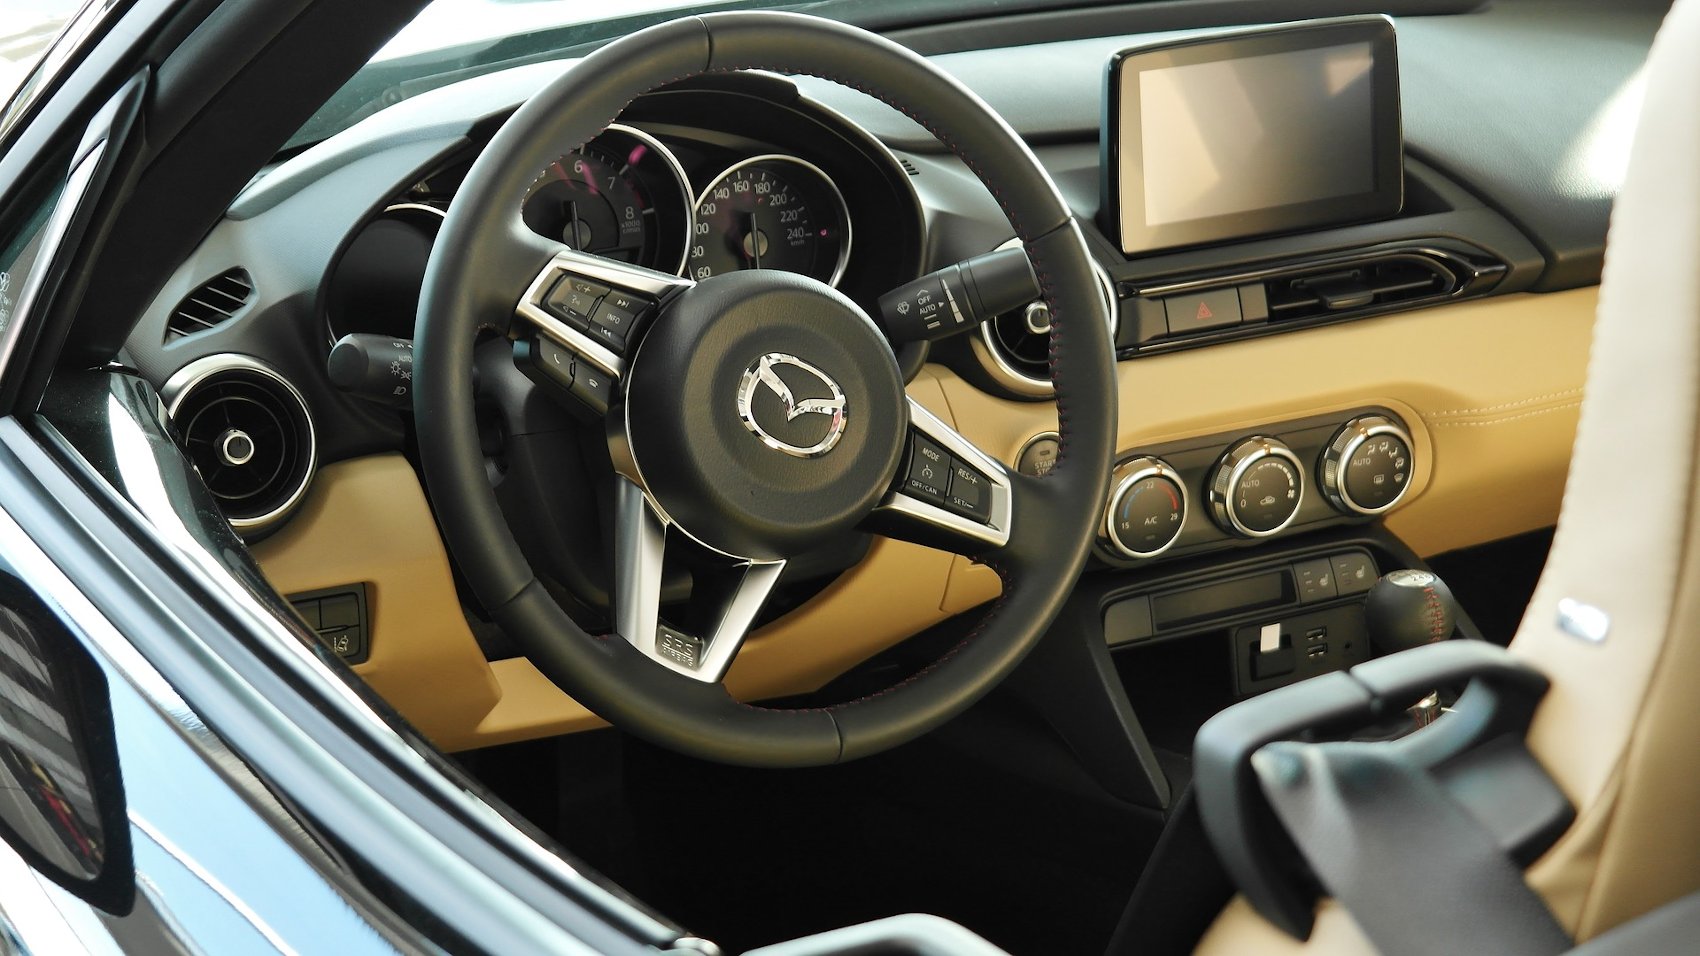 Mazda Infotainment System - Image by RitaE